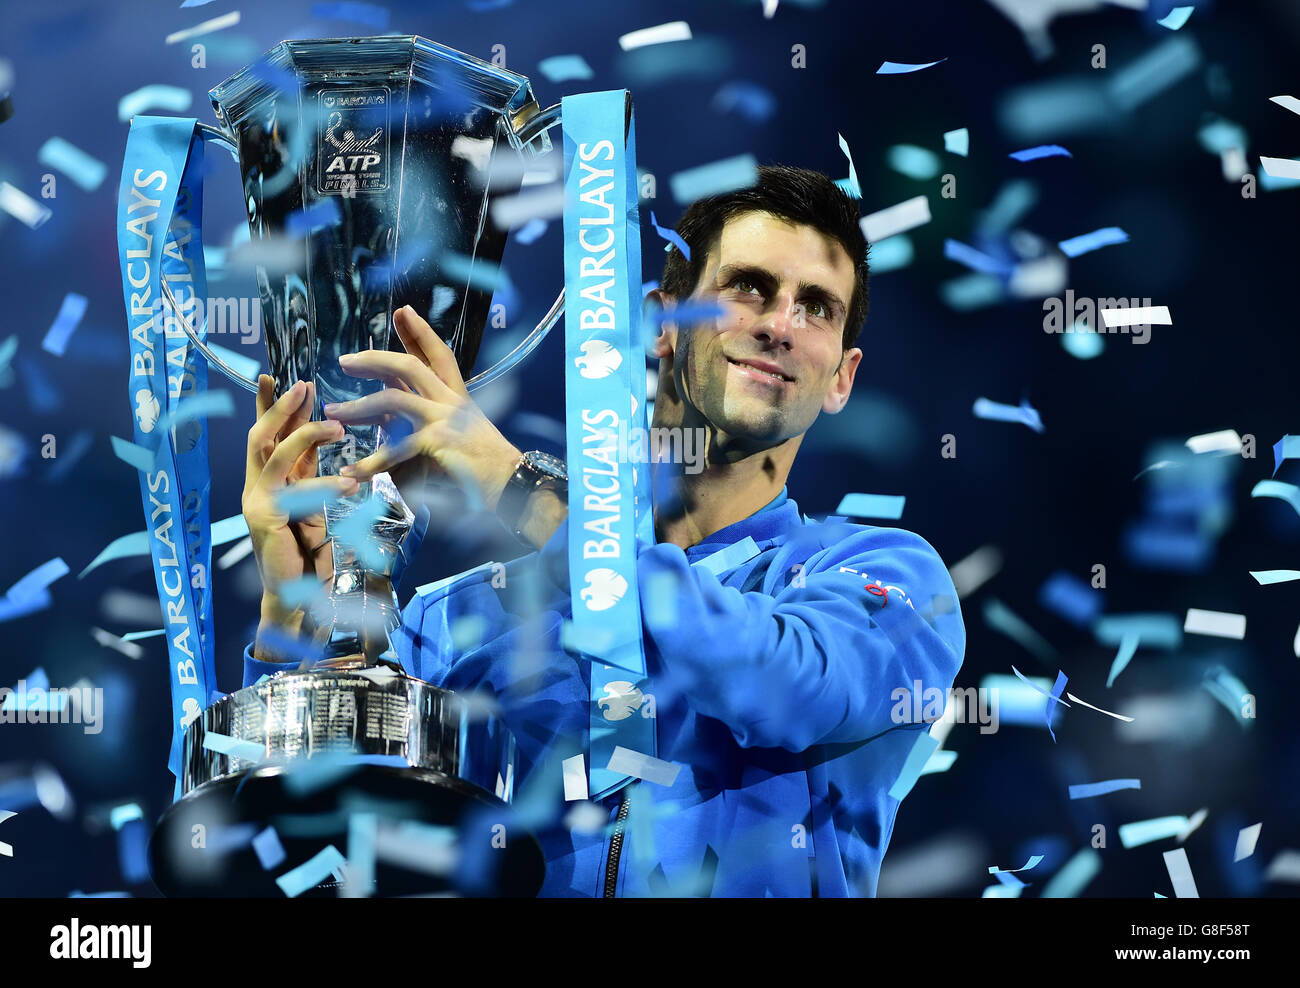 Serbia's Novak Djokovic celebrates winning the Final of the ATP World Tour Finals at the O2 Arena, London. PRESS ASSSOCIATION Photo. Picture date: Sunday November 22, 2015. See PA story TENNIS London. Photo credit should read: Adam Davy/PA Wire. Stock Photo